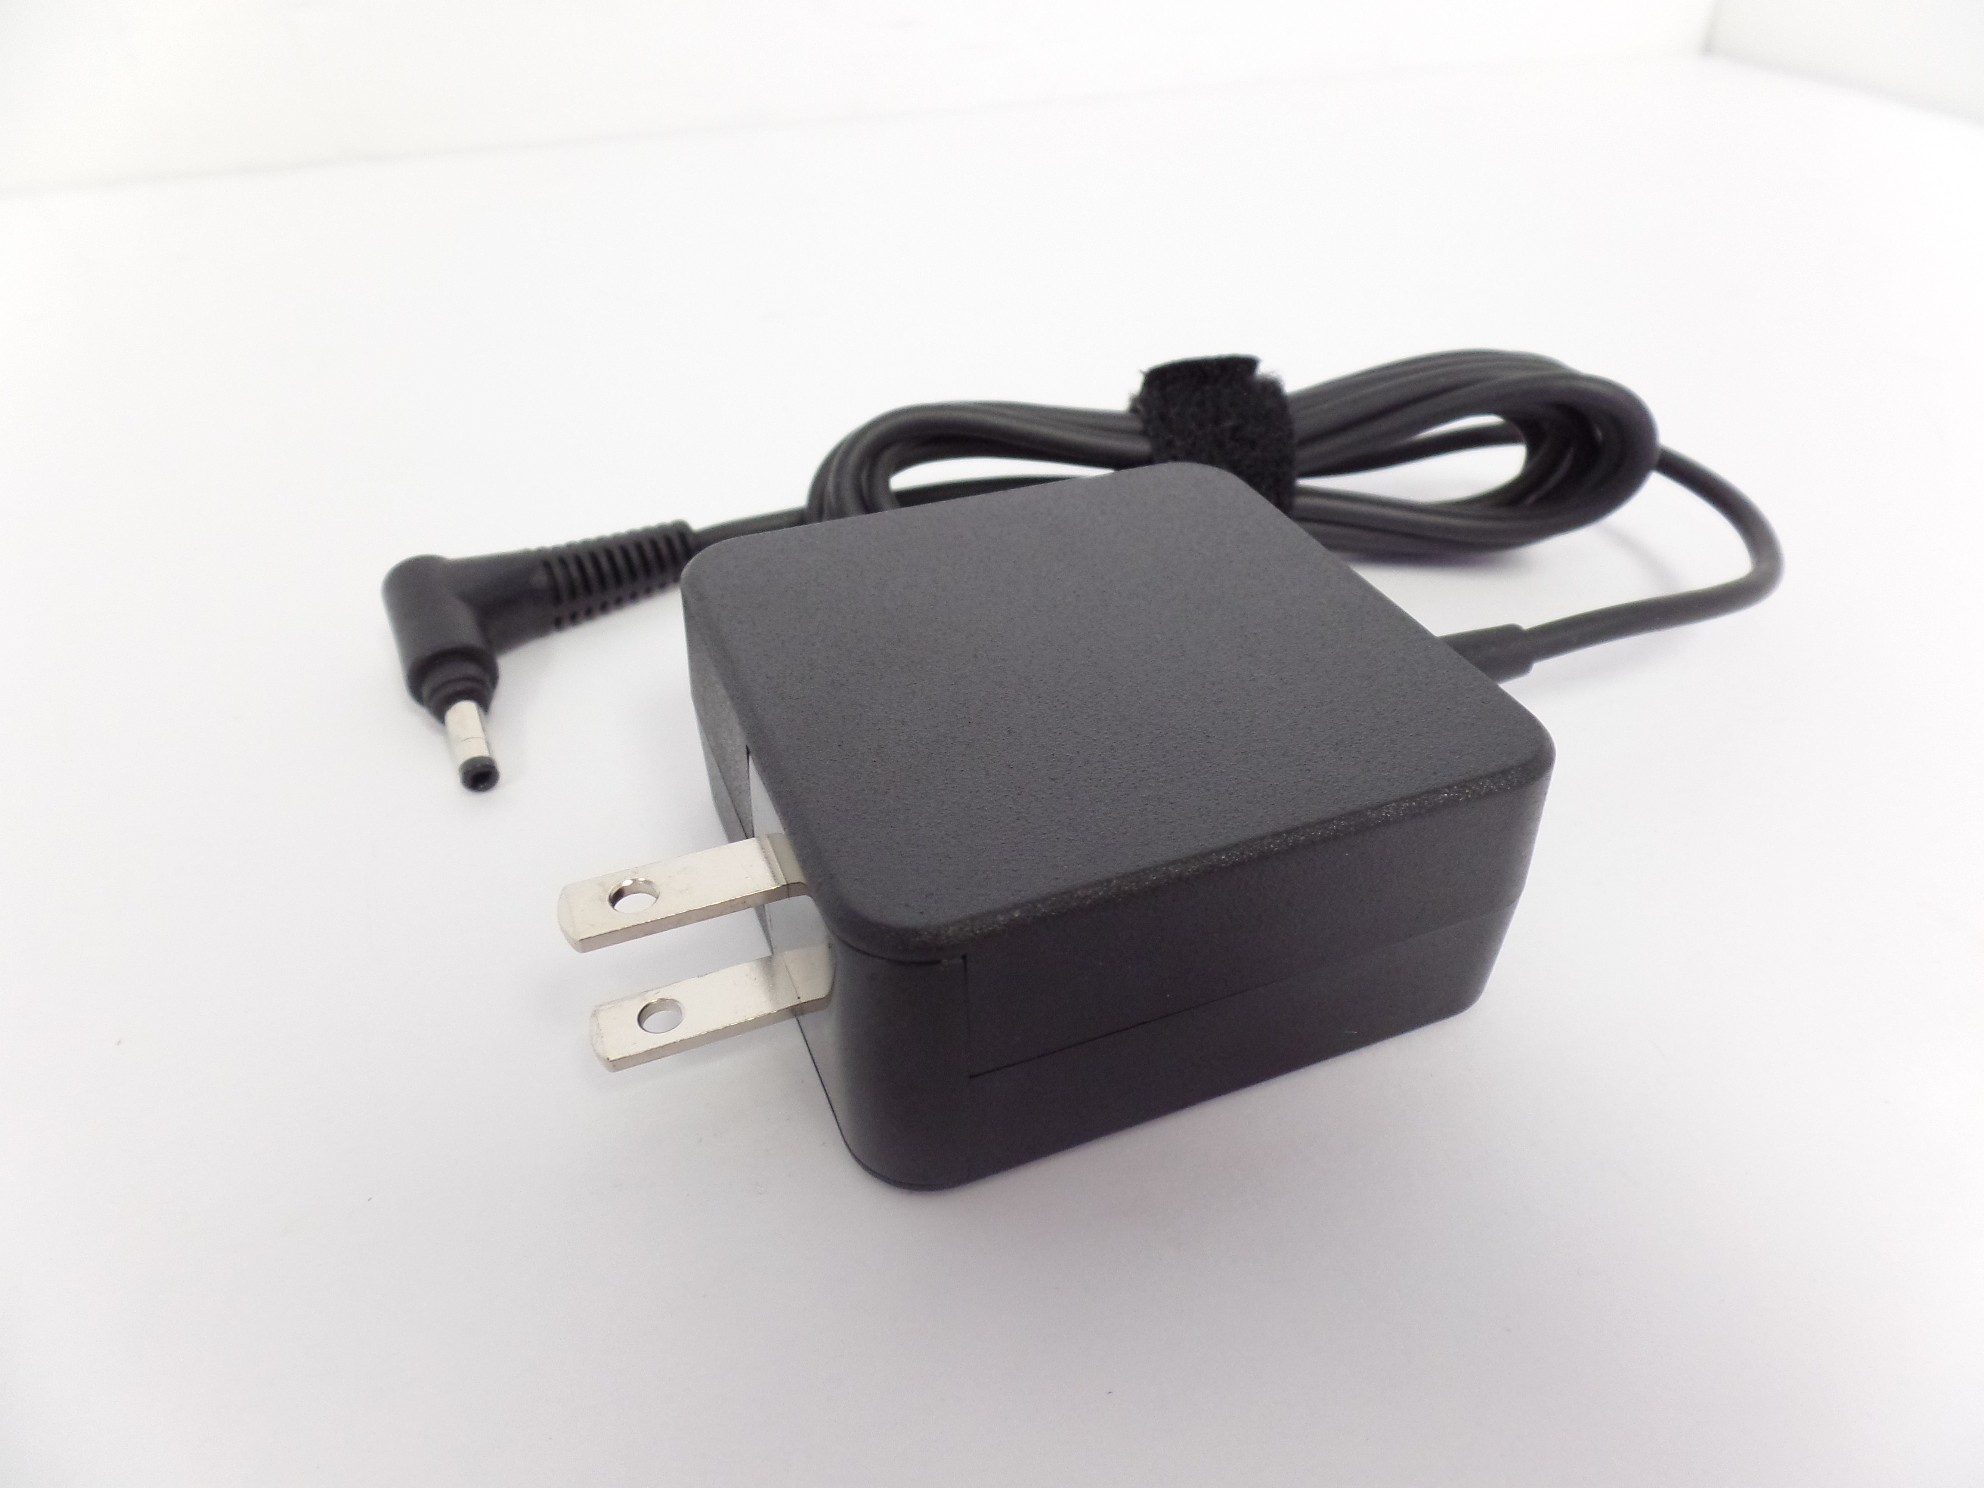 Charger f/ Lenovo N23 Chromebook AC Adapter Power Supply ADP-45DWA 20V 2.25A 45W